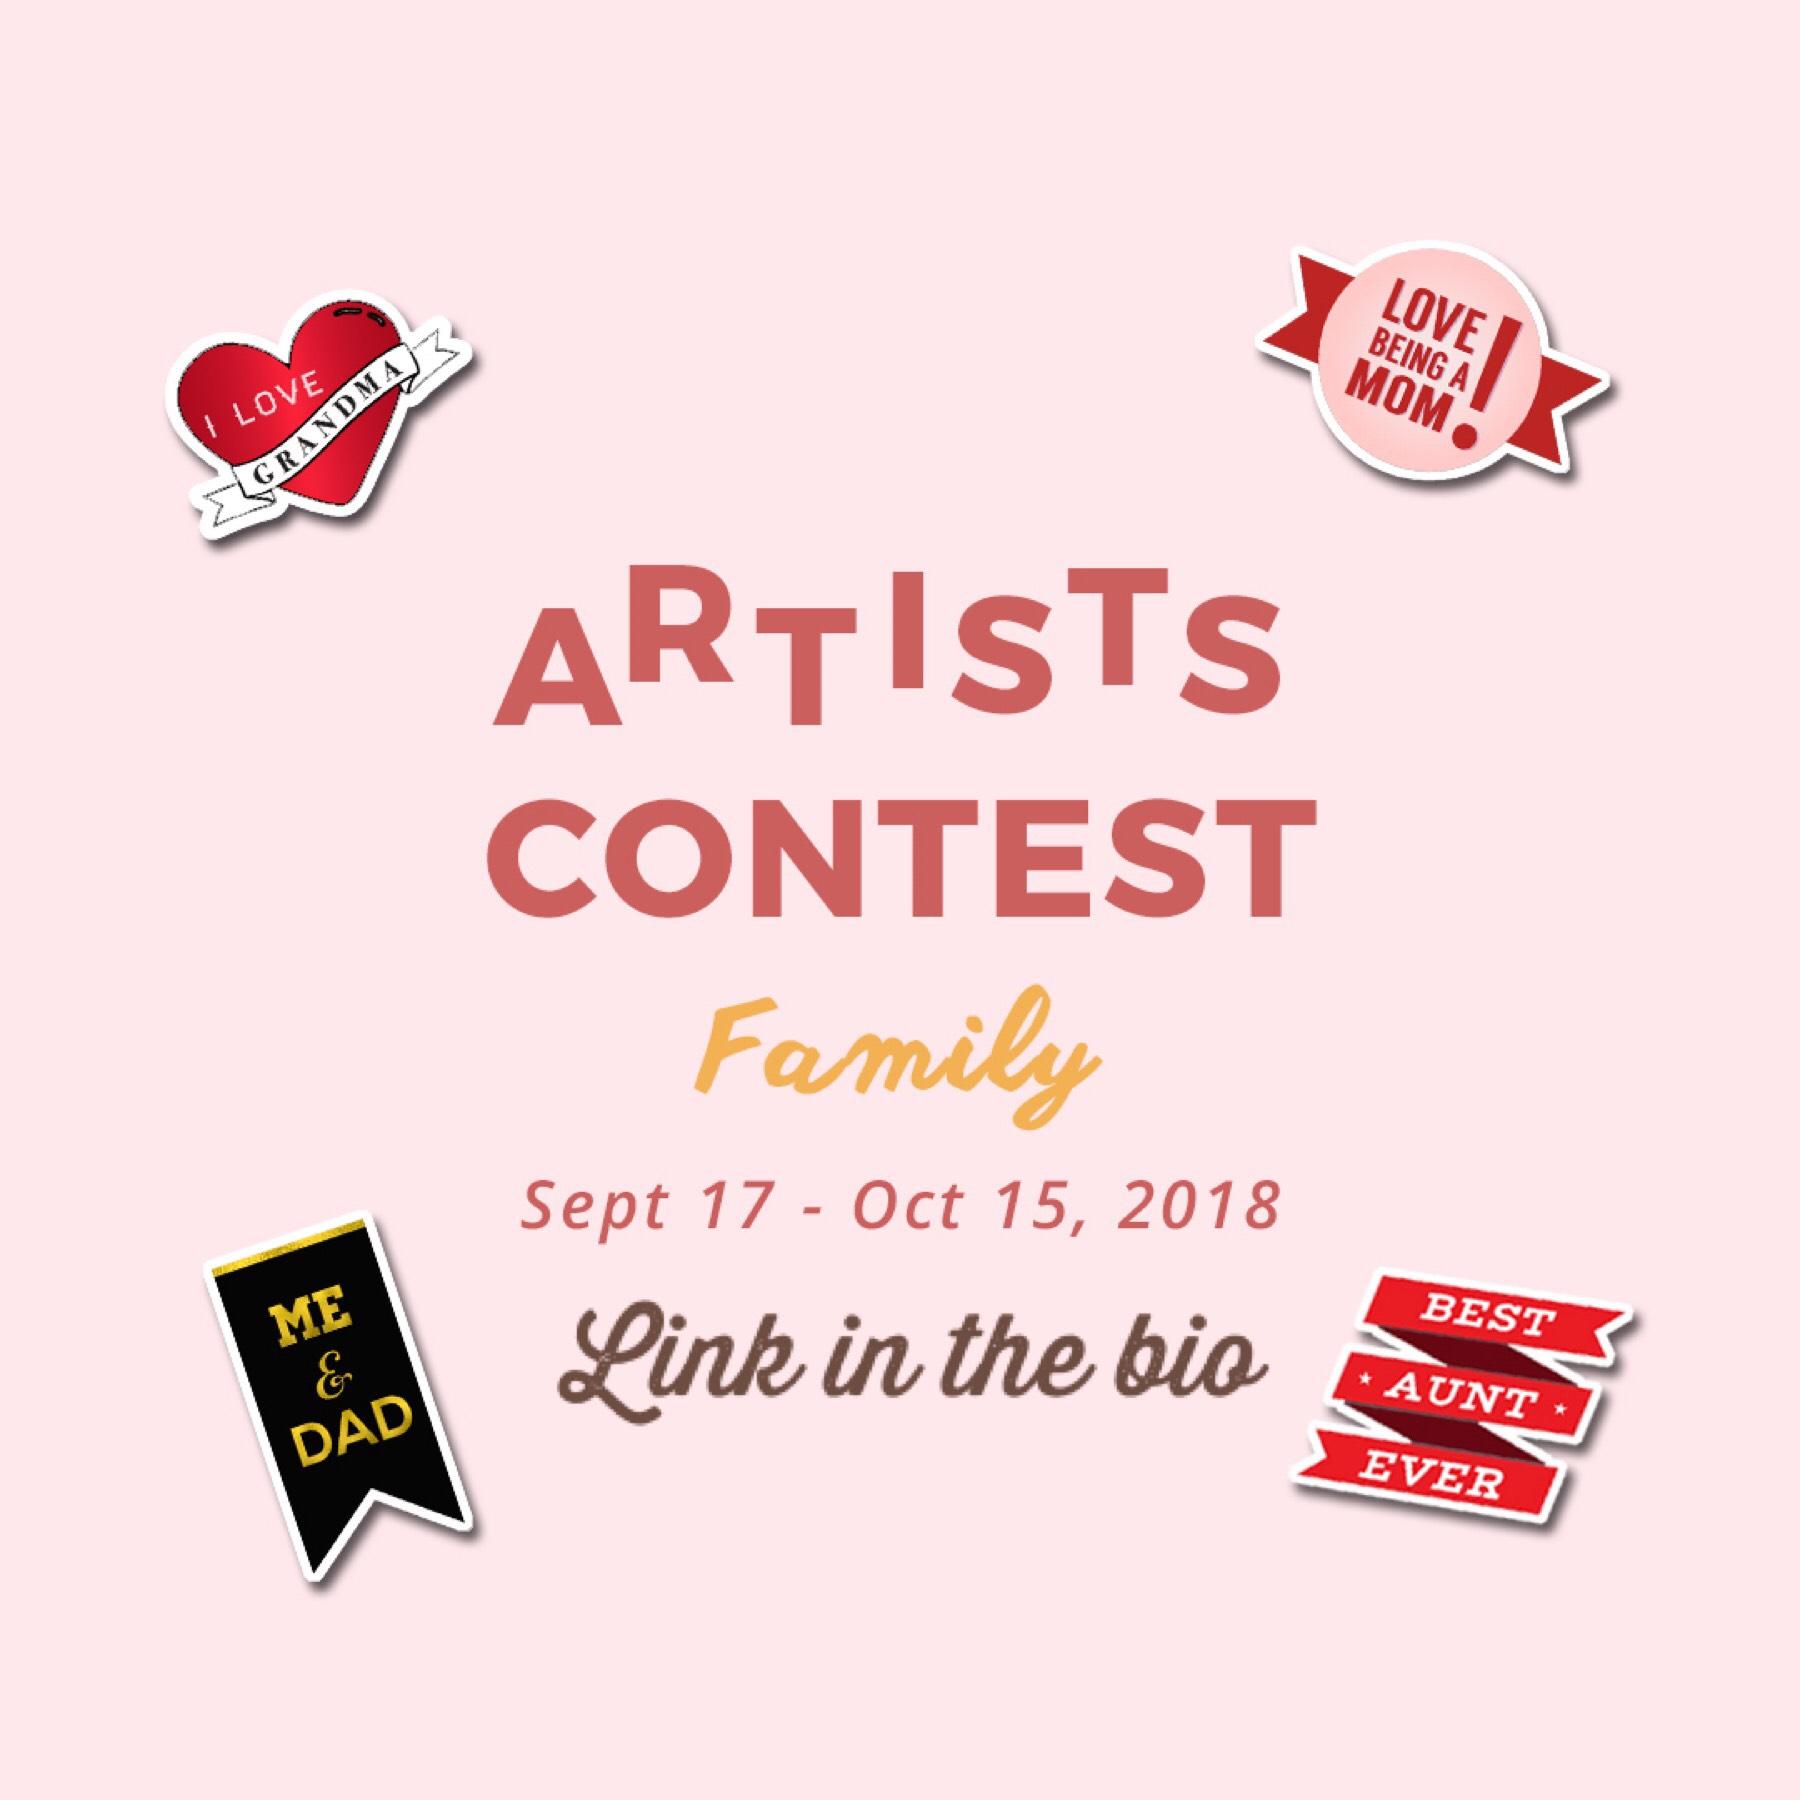 Artists’ Contest: Family